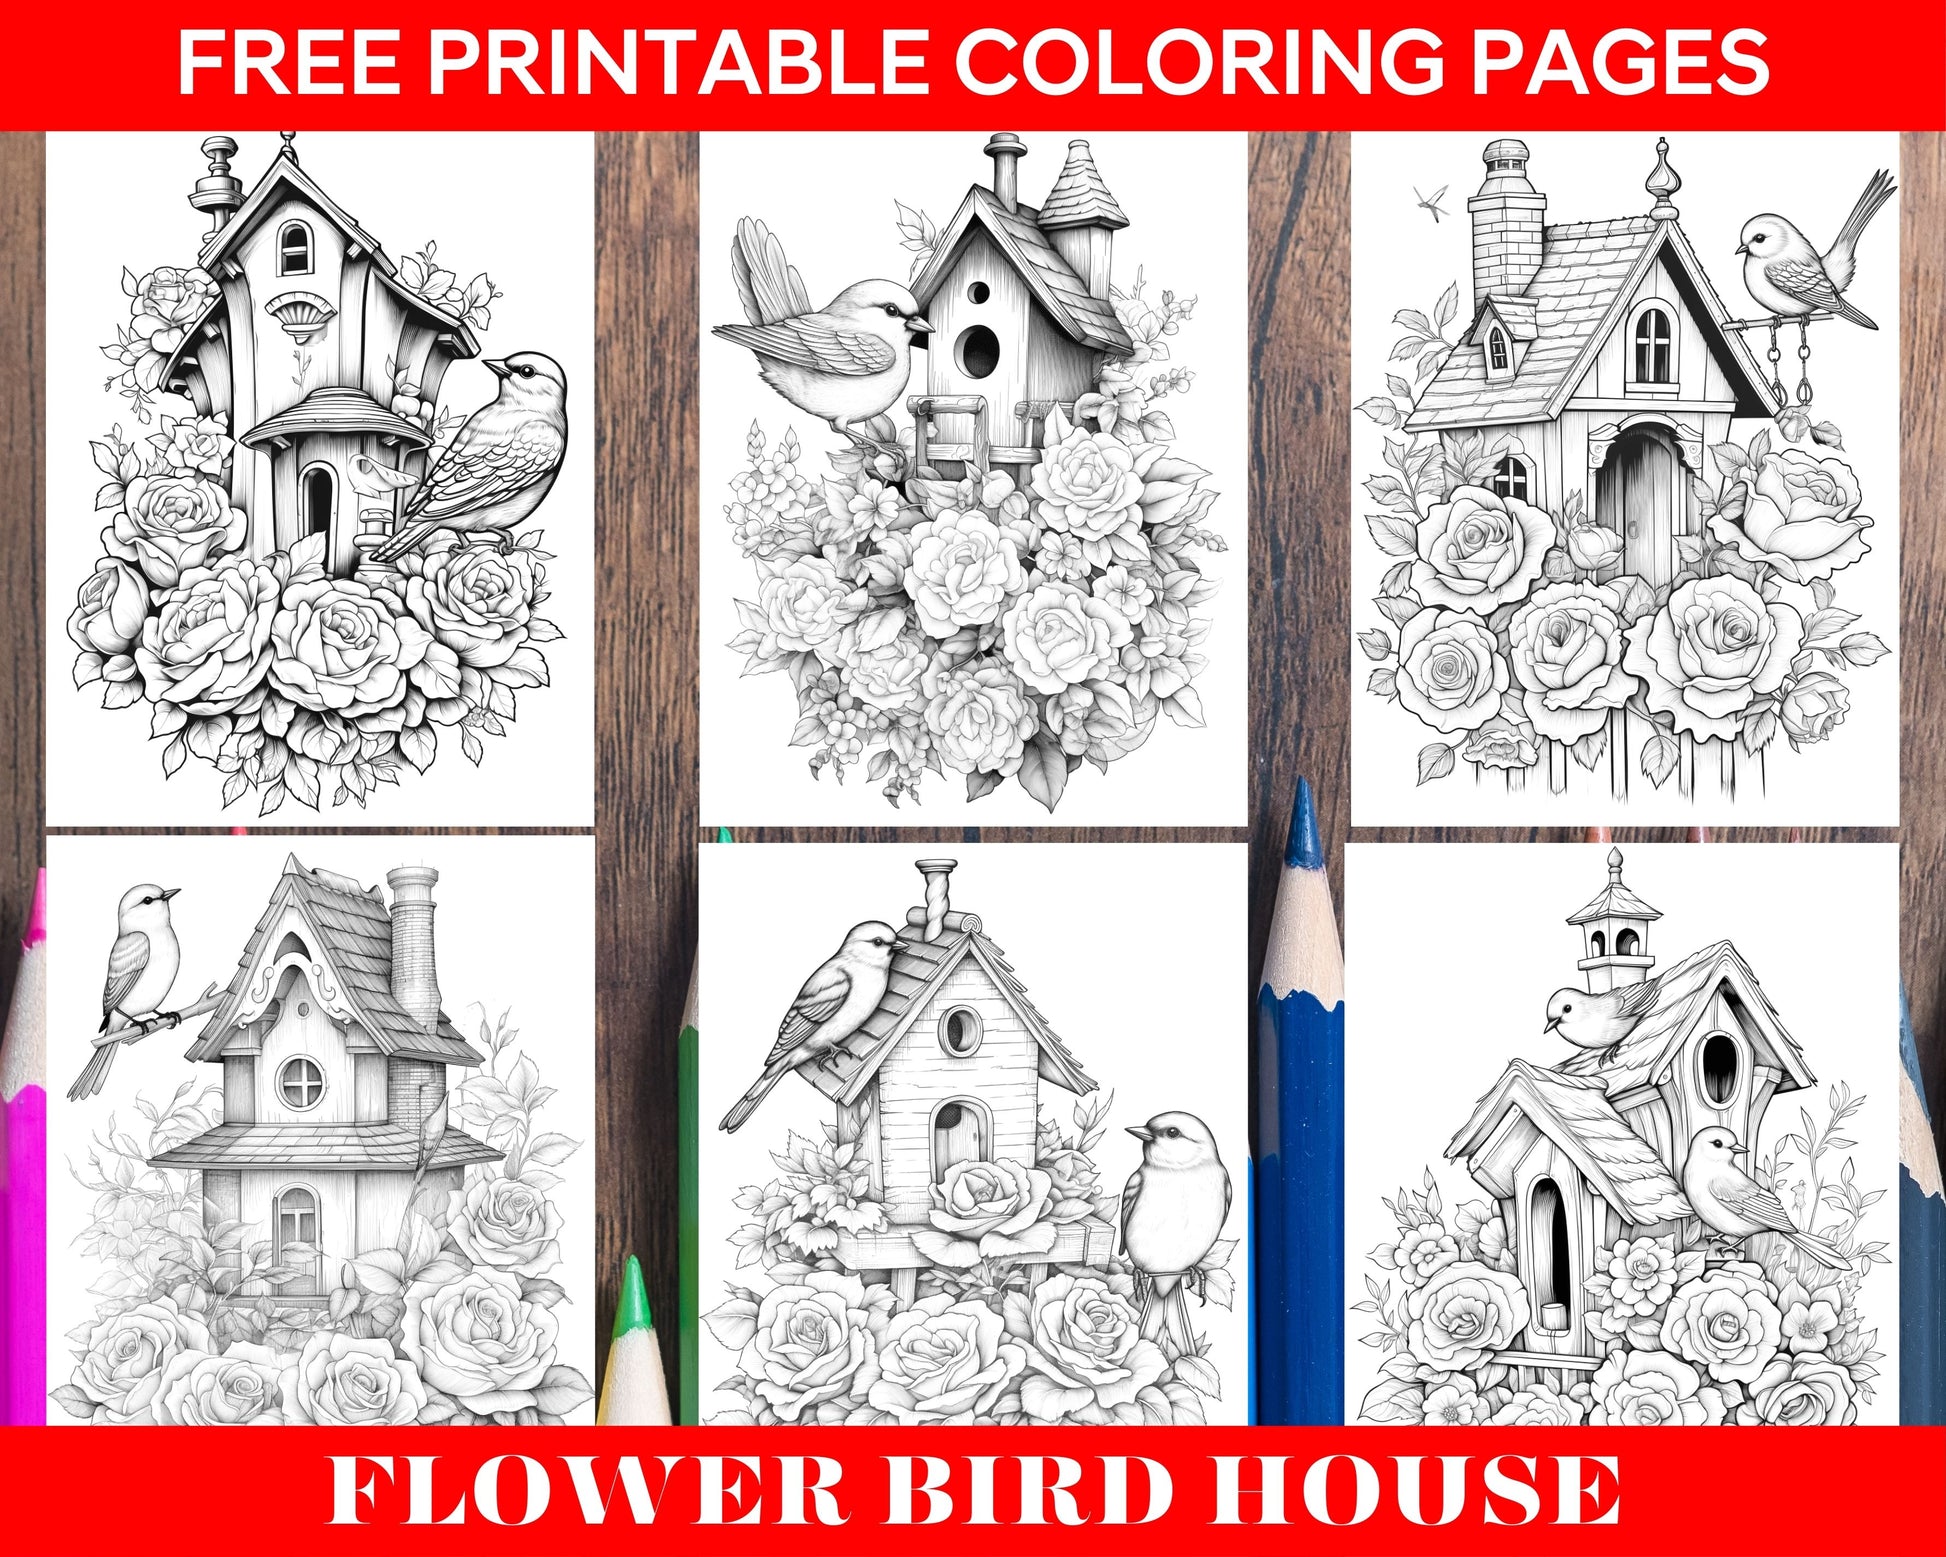 Floral birdhouse coloring page, grayscale coloring sheet for adults, printable nature coloring page, birdhouse art for coloring, free flower birdhouse coloring page